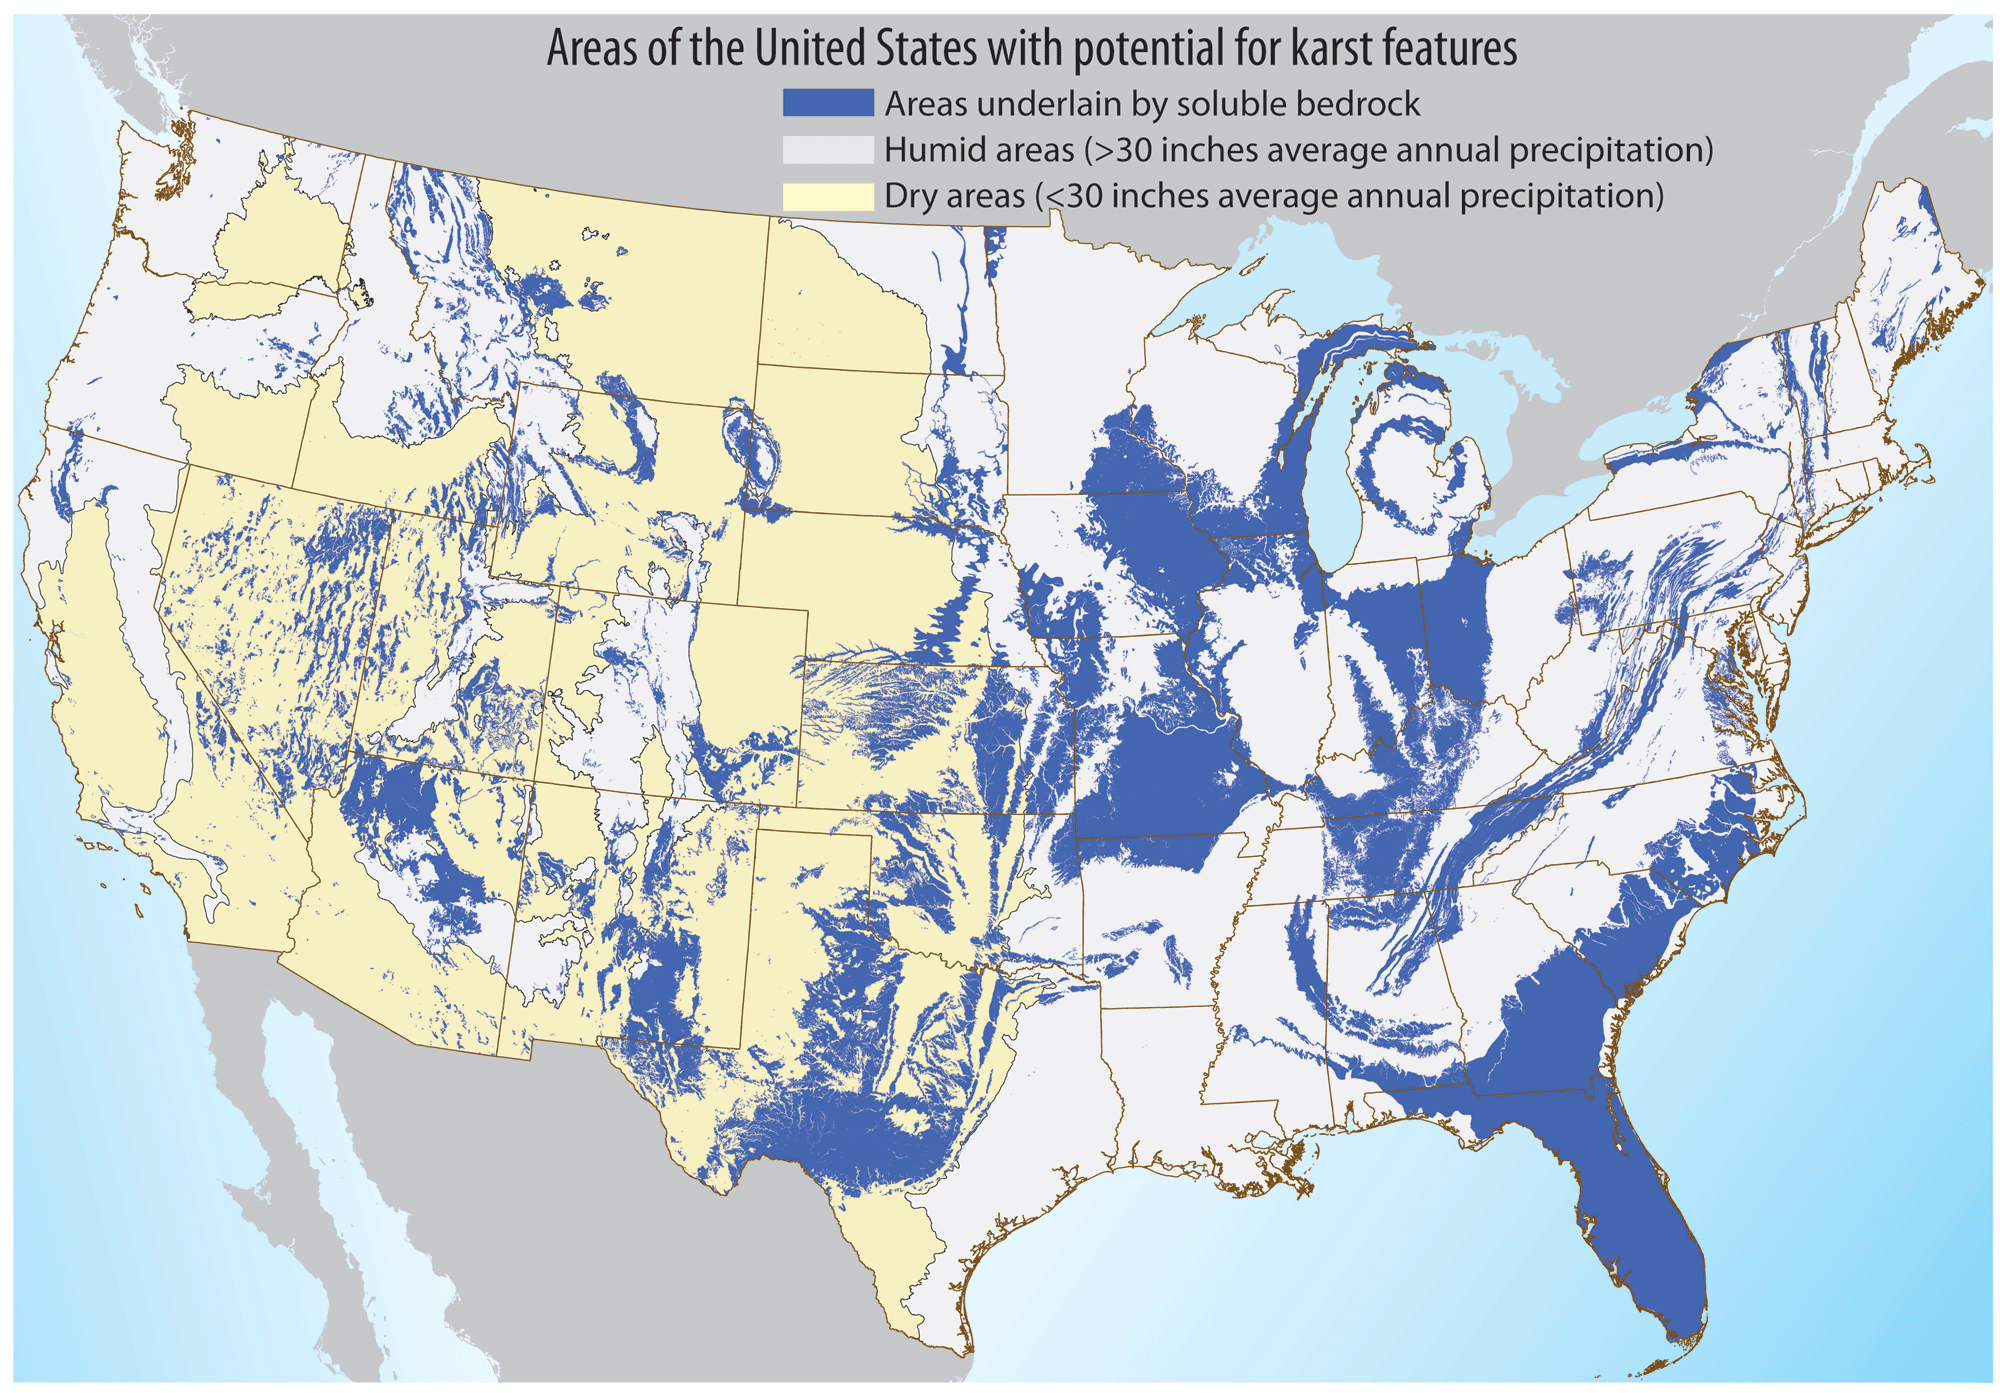 Graphic: Map shows relatively dry and humid areas, as well as the extent of potentially karstic rock types in the contiguous United States.